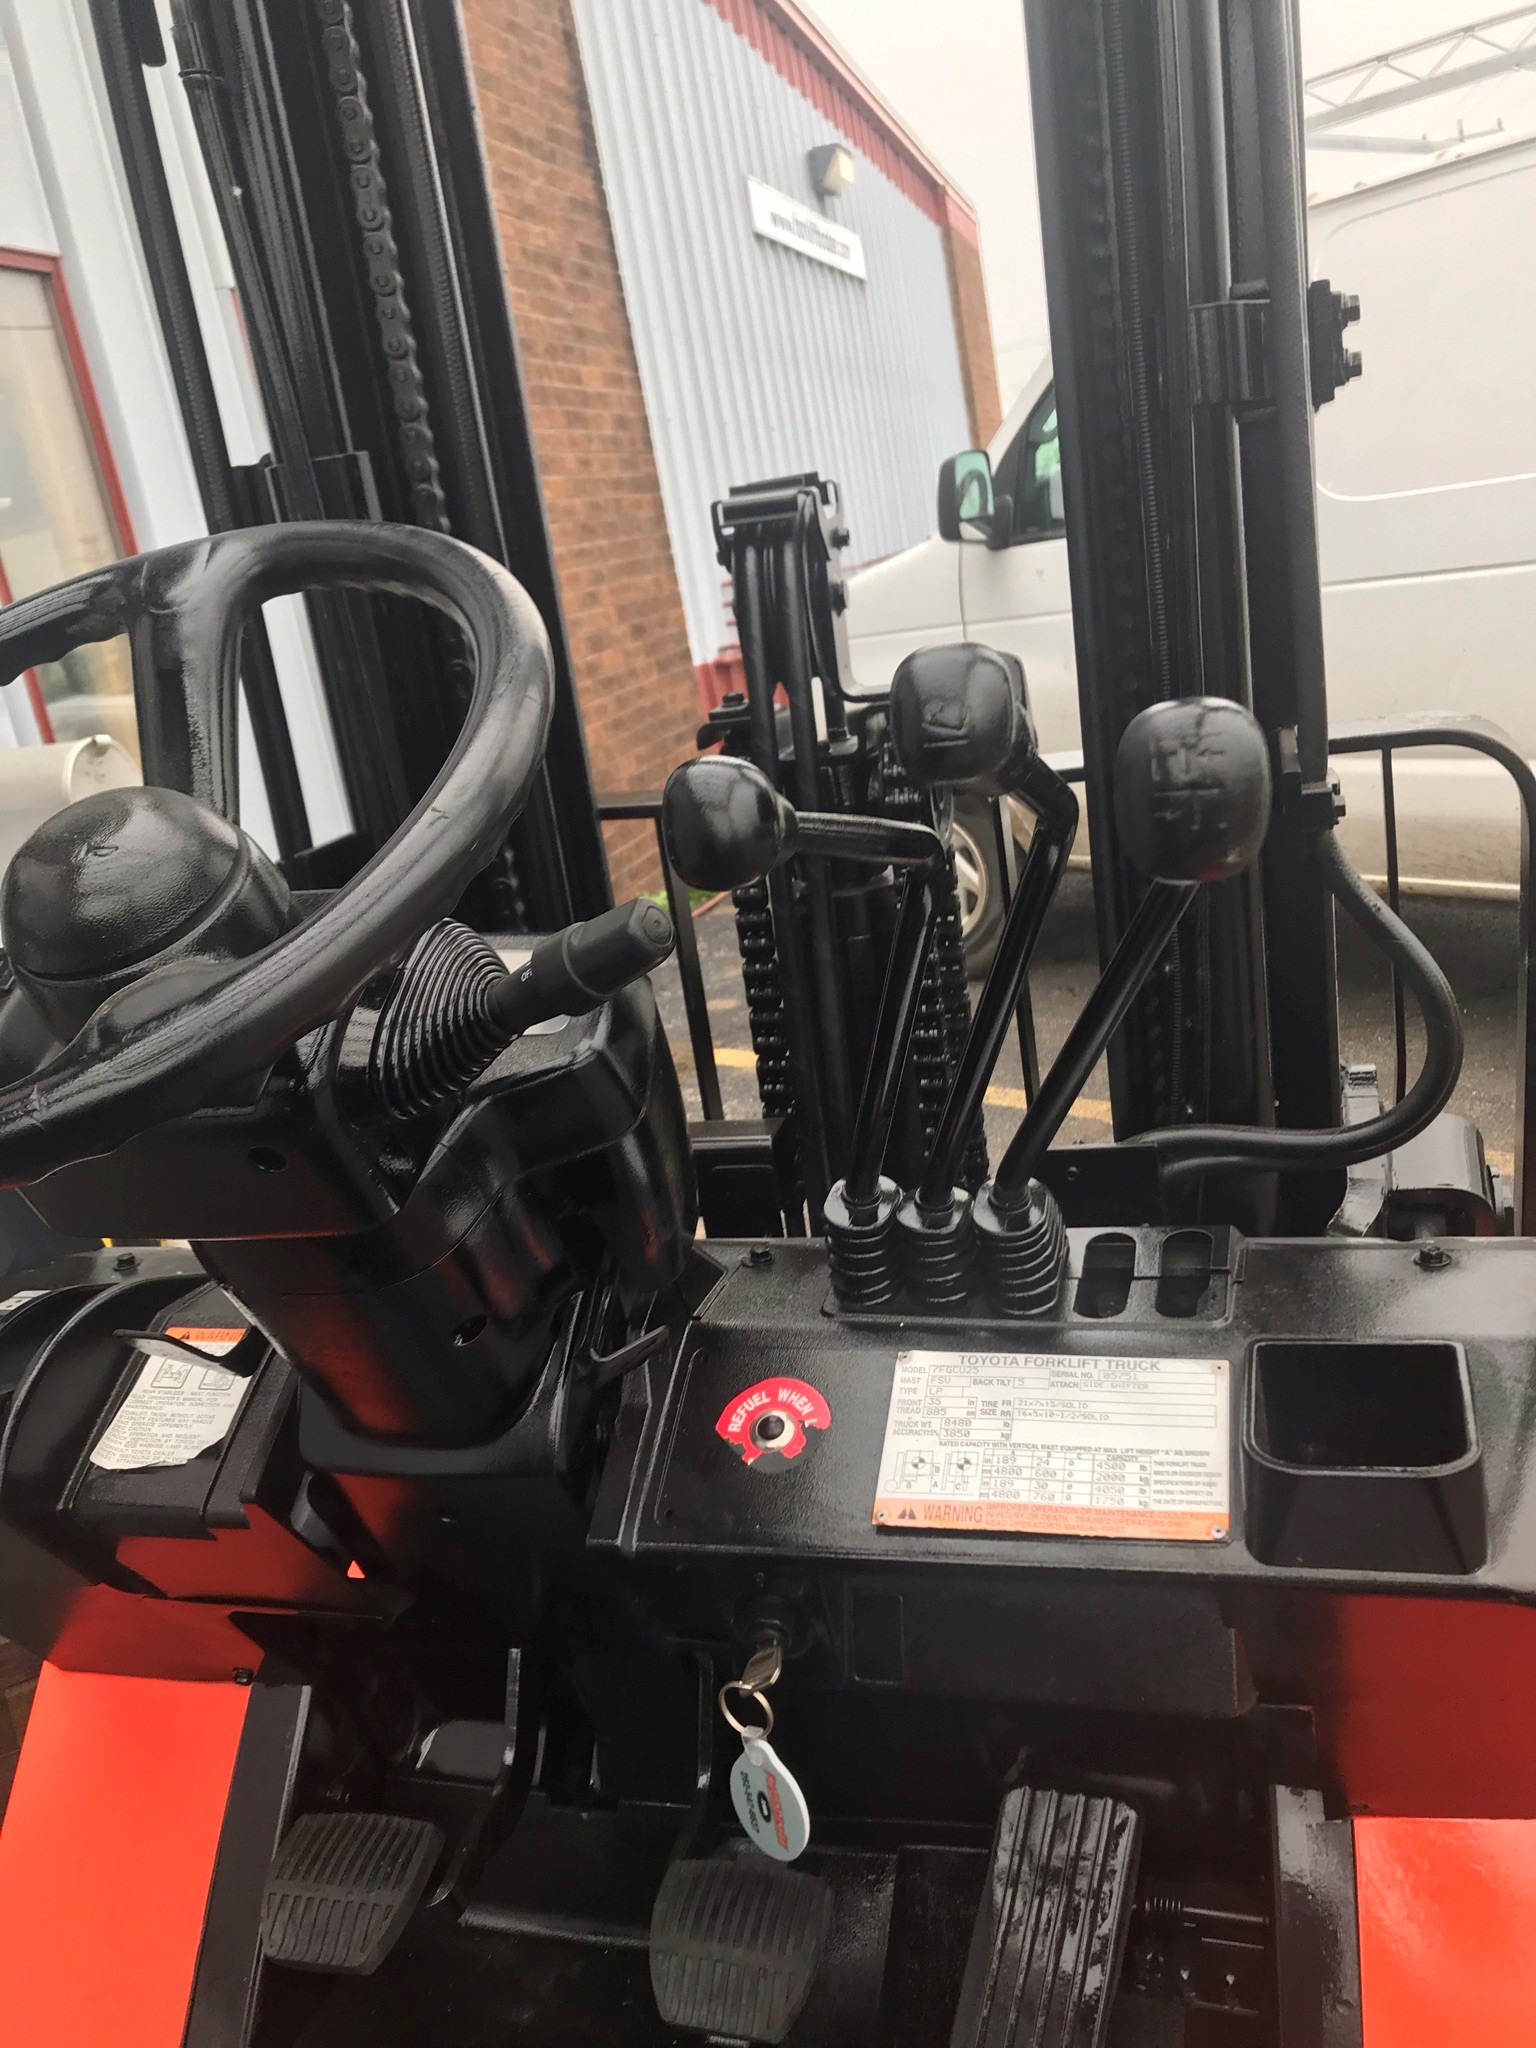 2007 toyota forklift with side shifter for sale